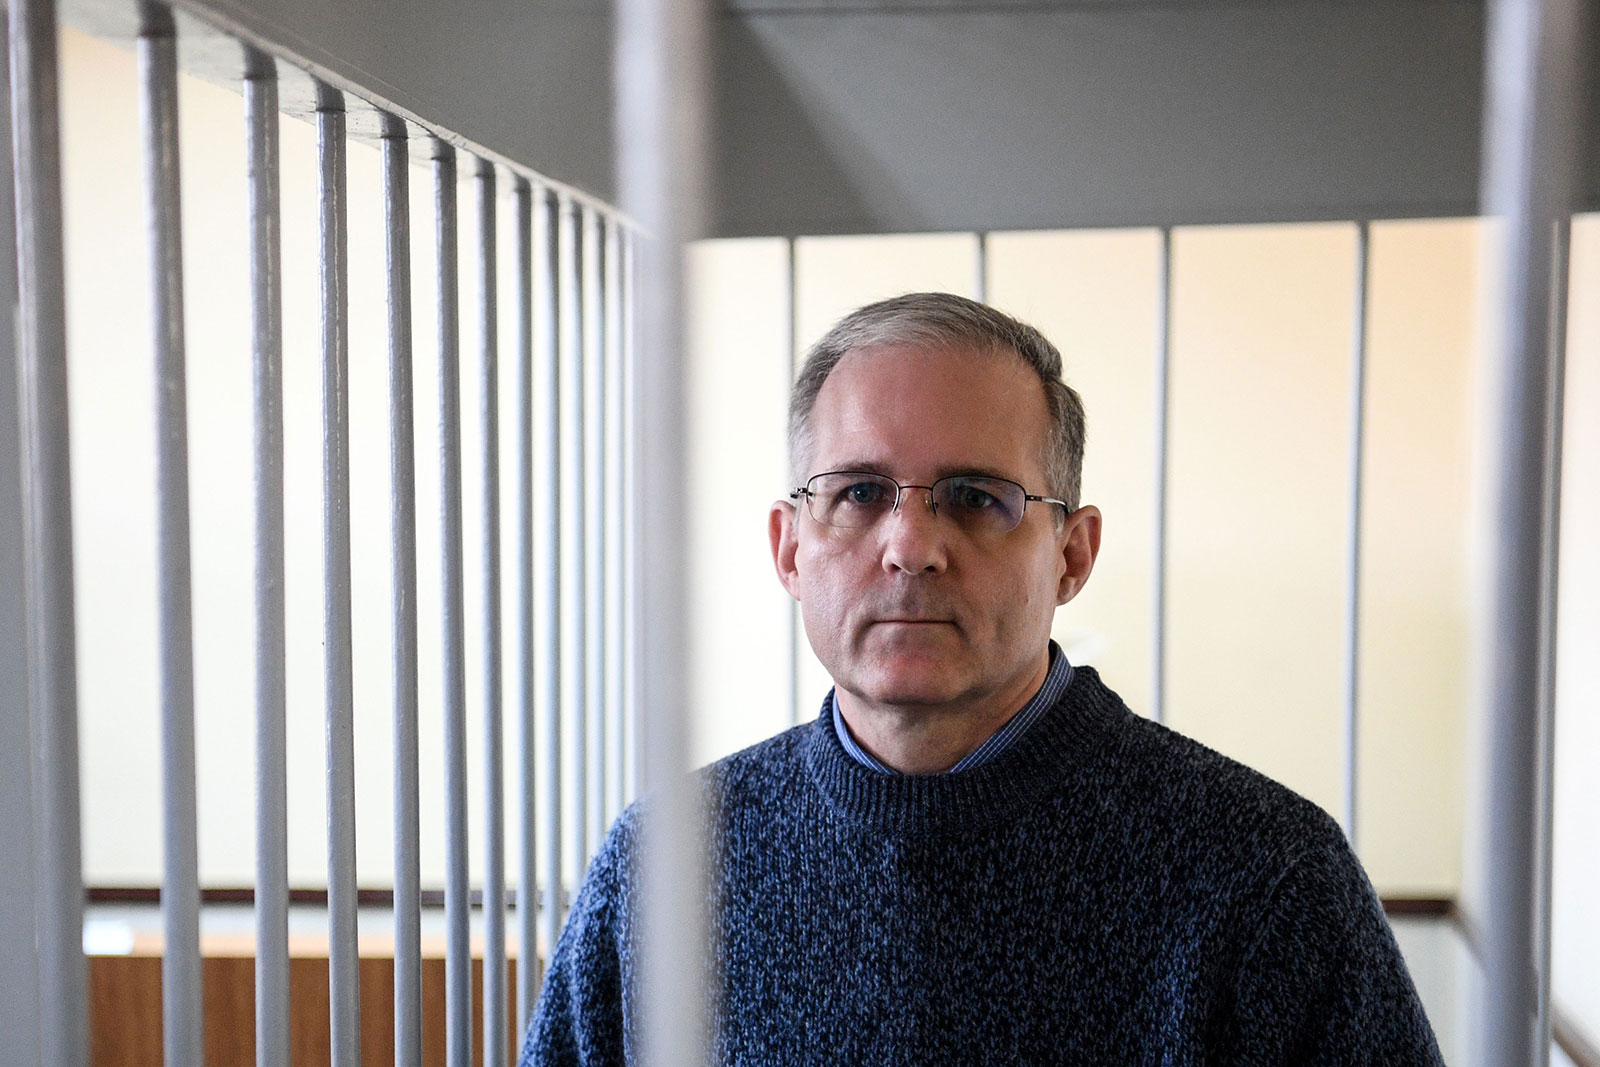 Paul Whelan stands inside a defendants' cage during a hearing at a court in Moscow in 2019.